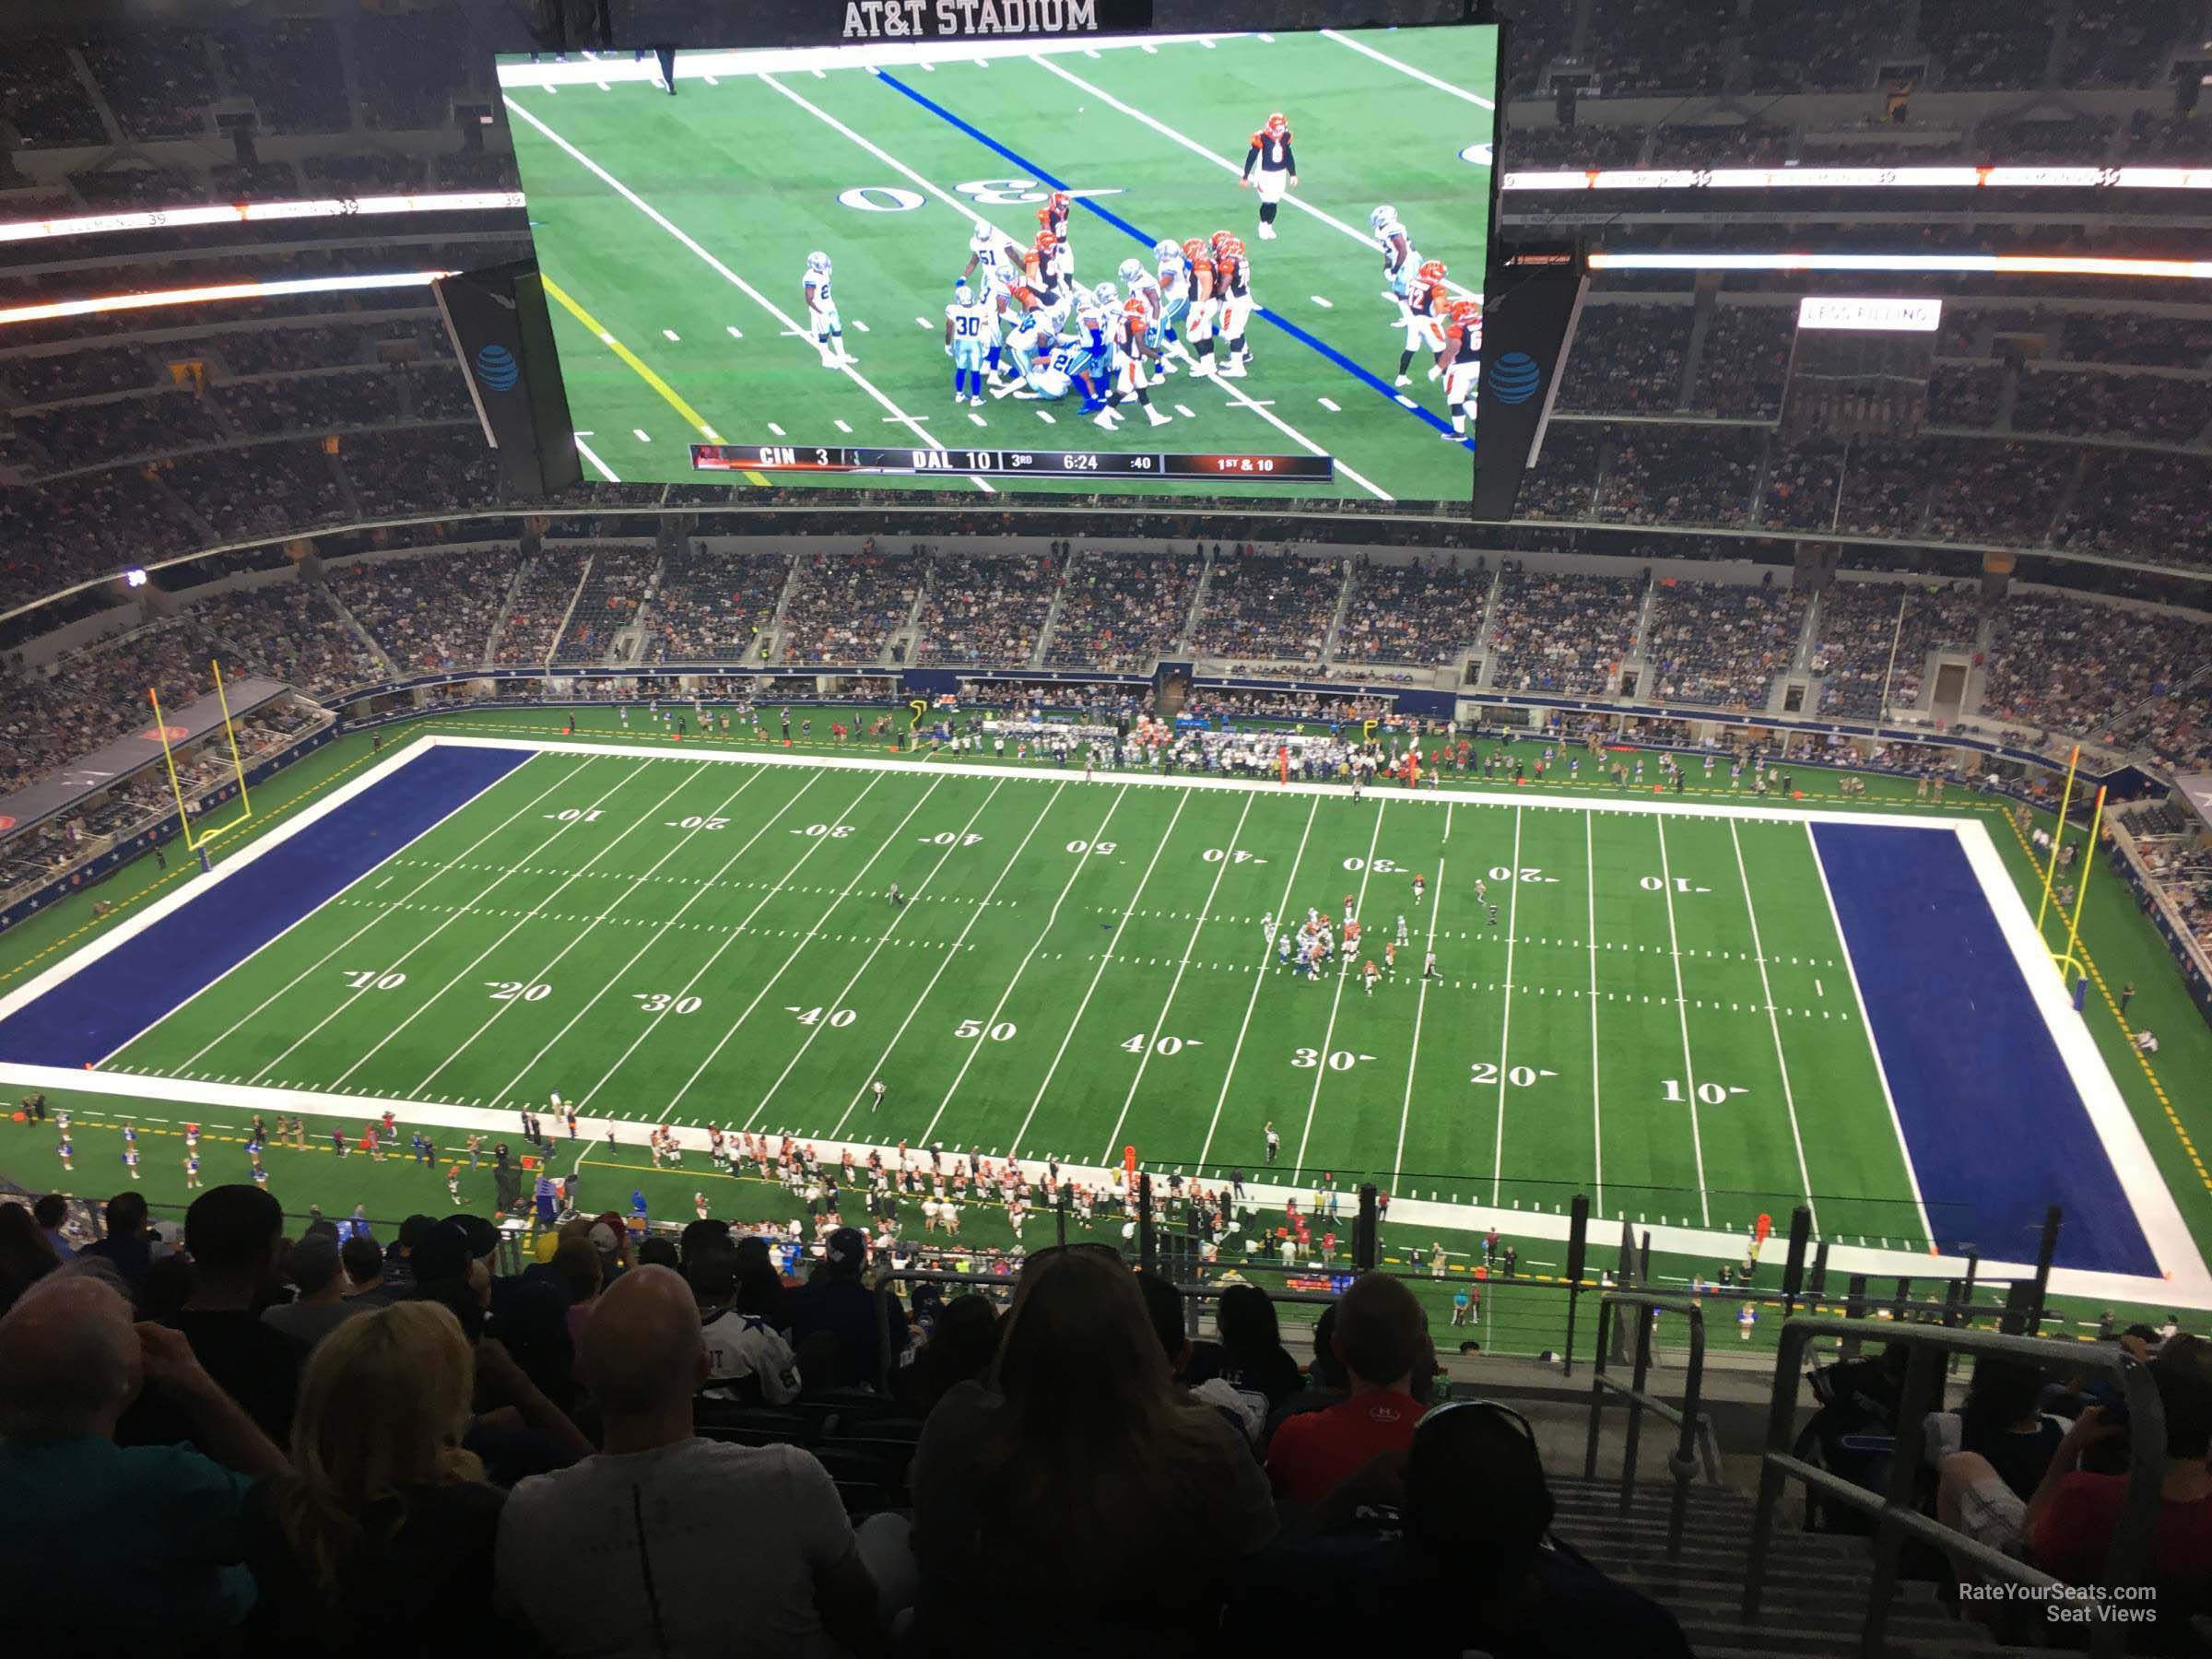 section 446, row 22 seat view  for football - at&t stadium (cowboys stadium)